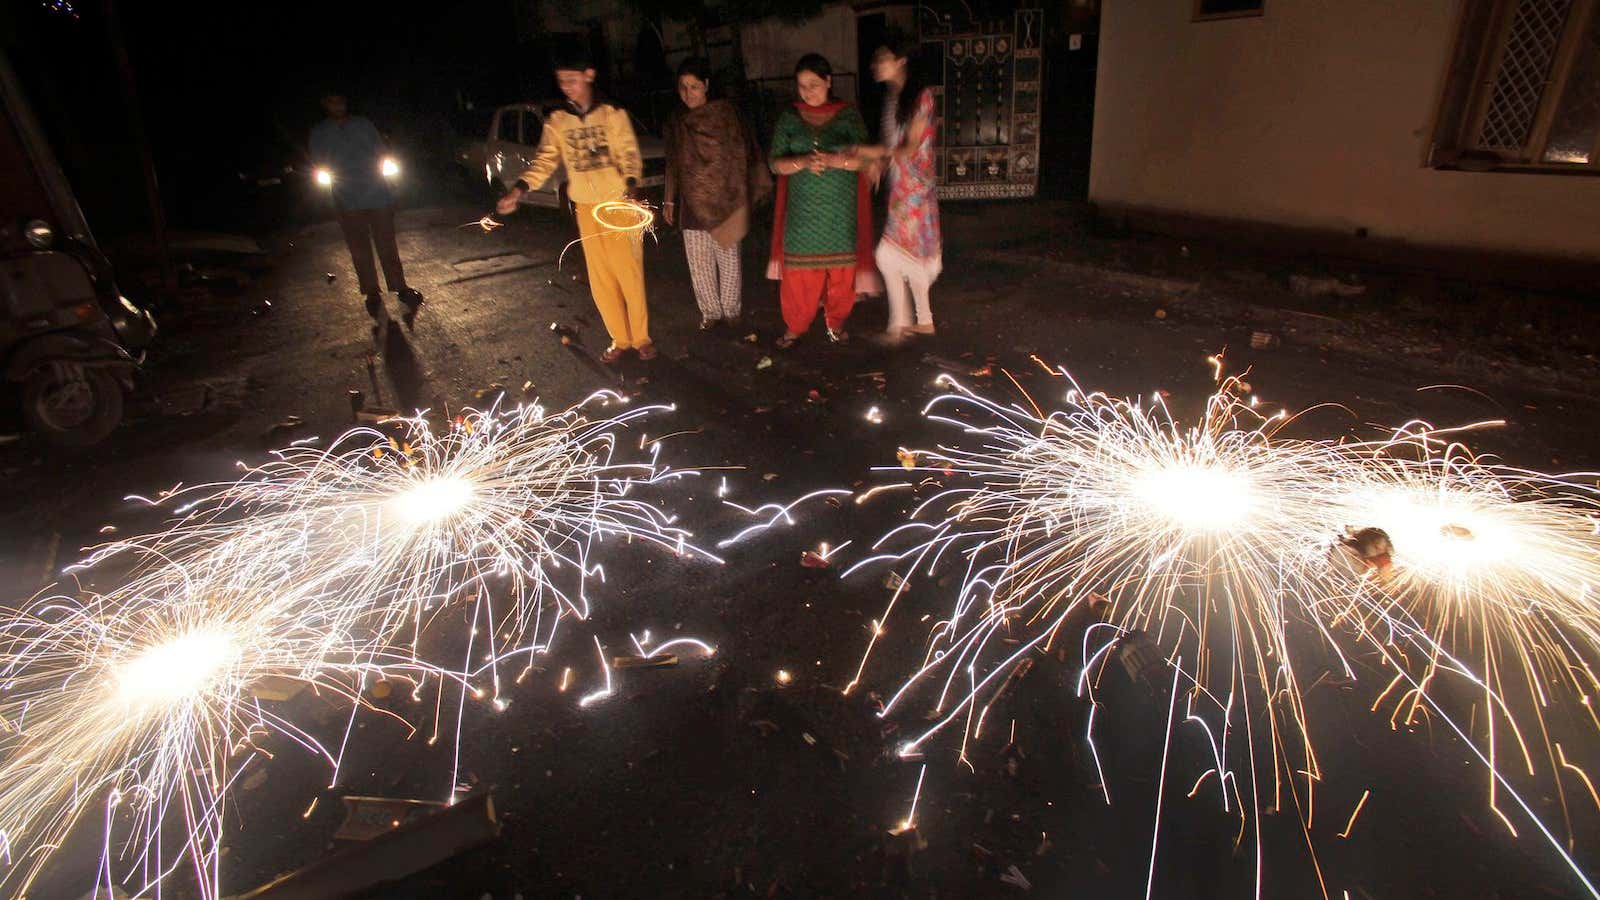 Diwali sales can account for a third of annual sales for some shopping websites.